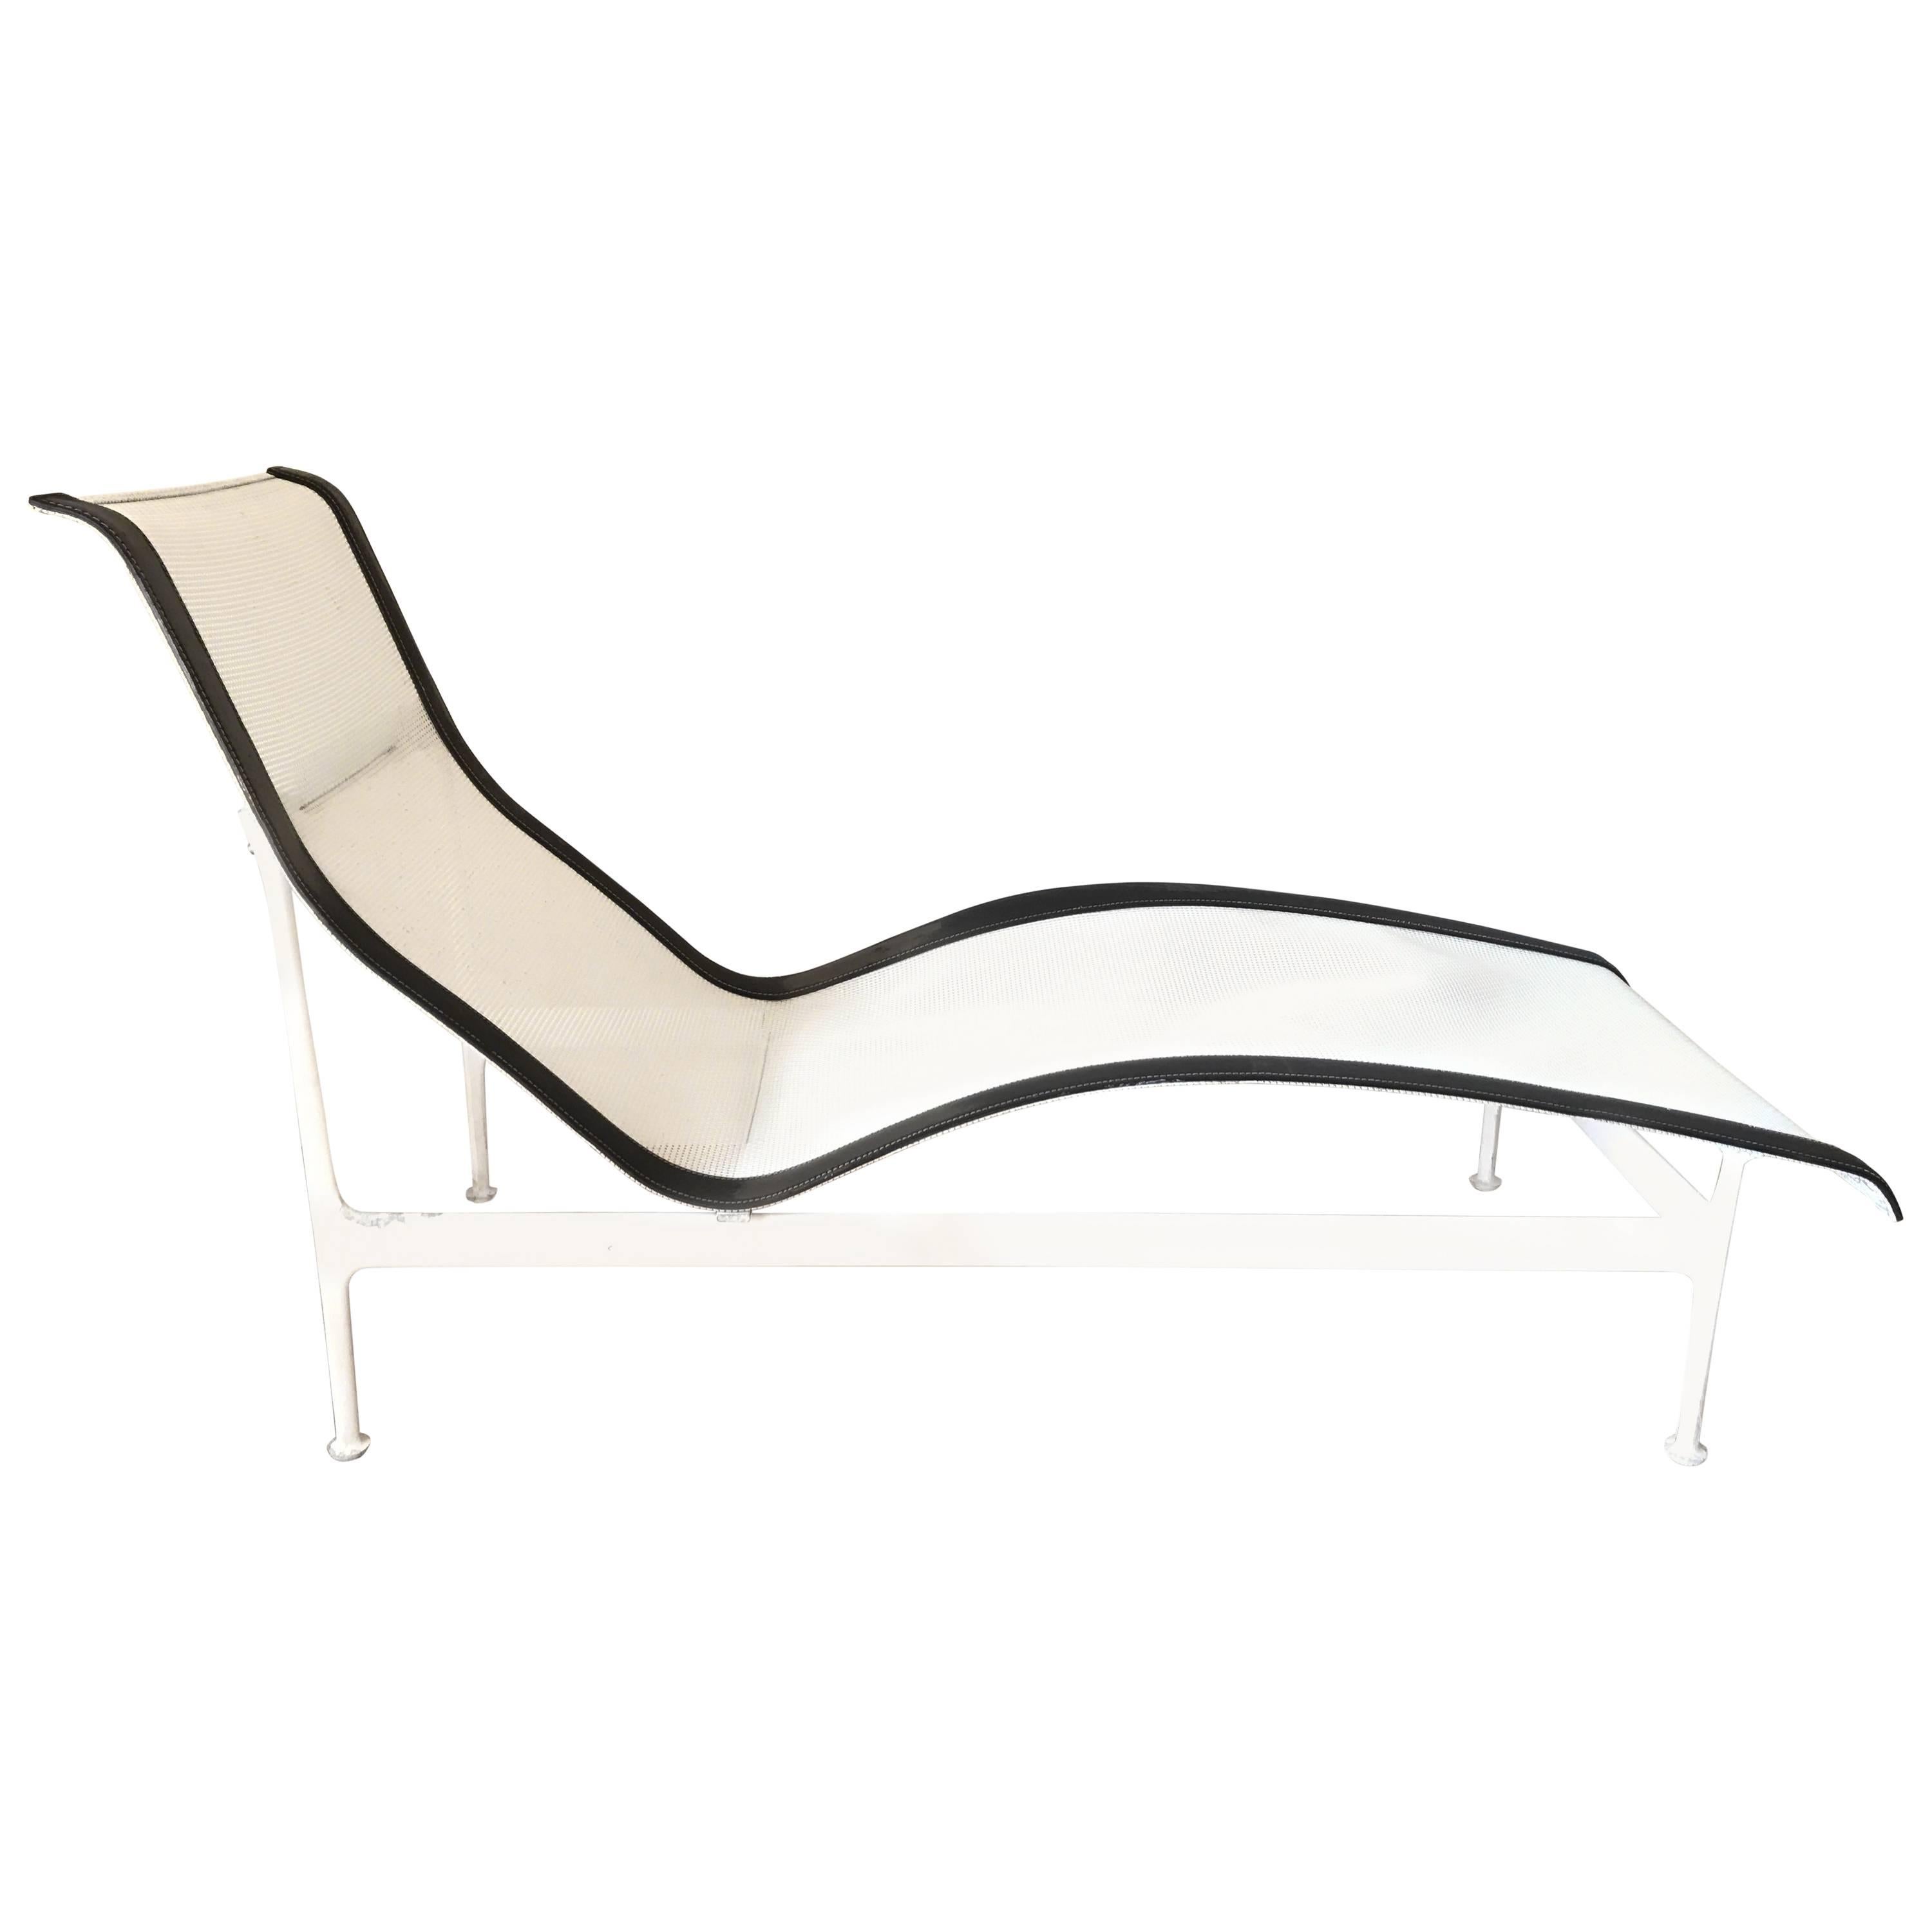 Richard Schultz "Leisure Collection" Chaise Lounge for Knoll